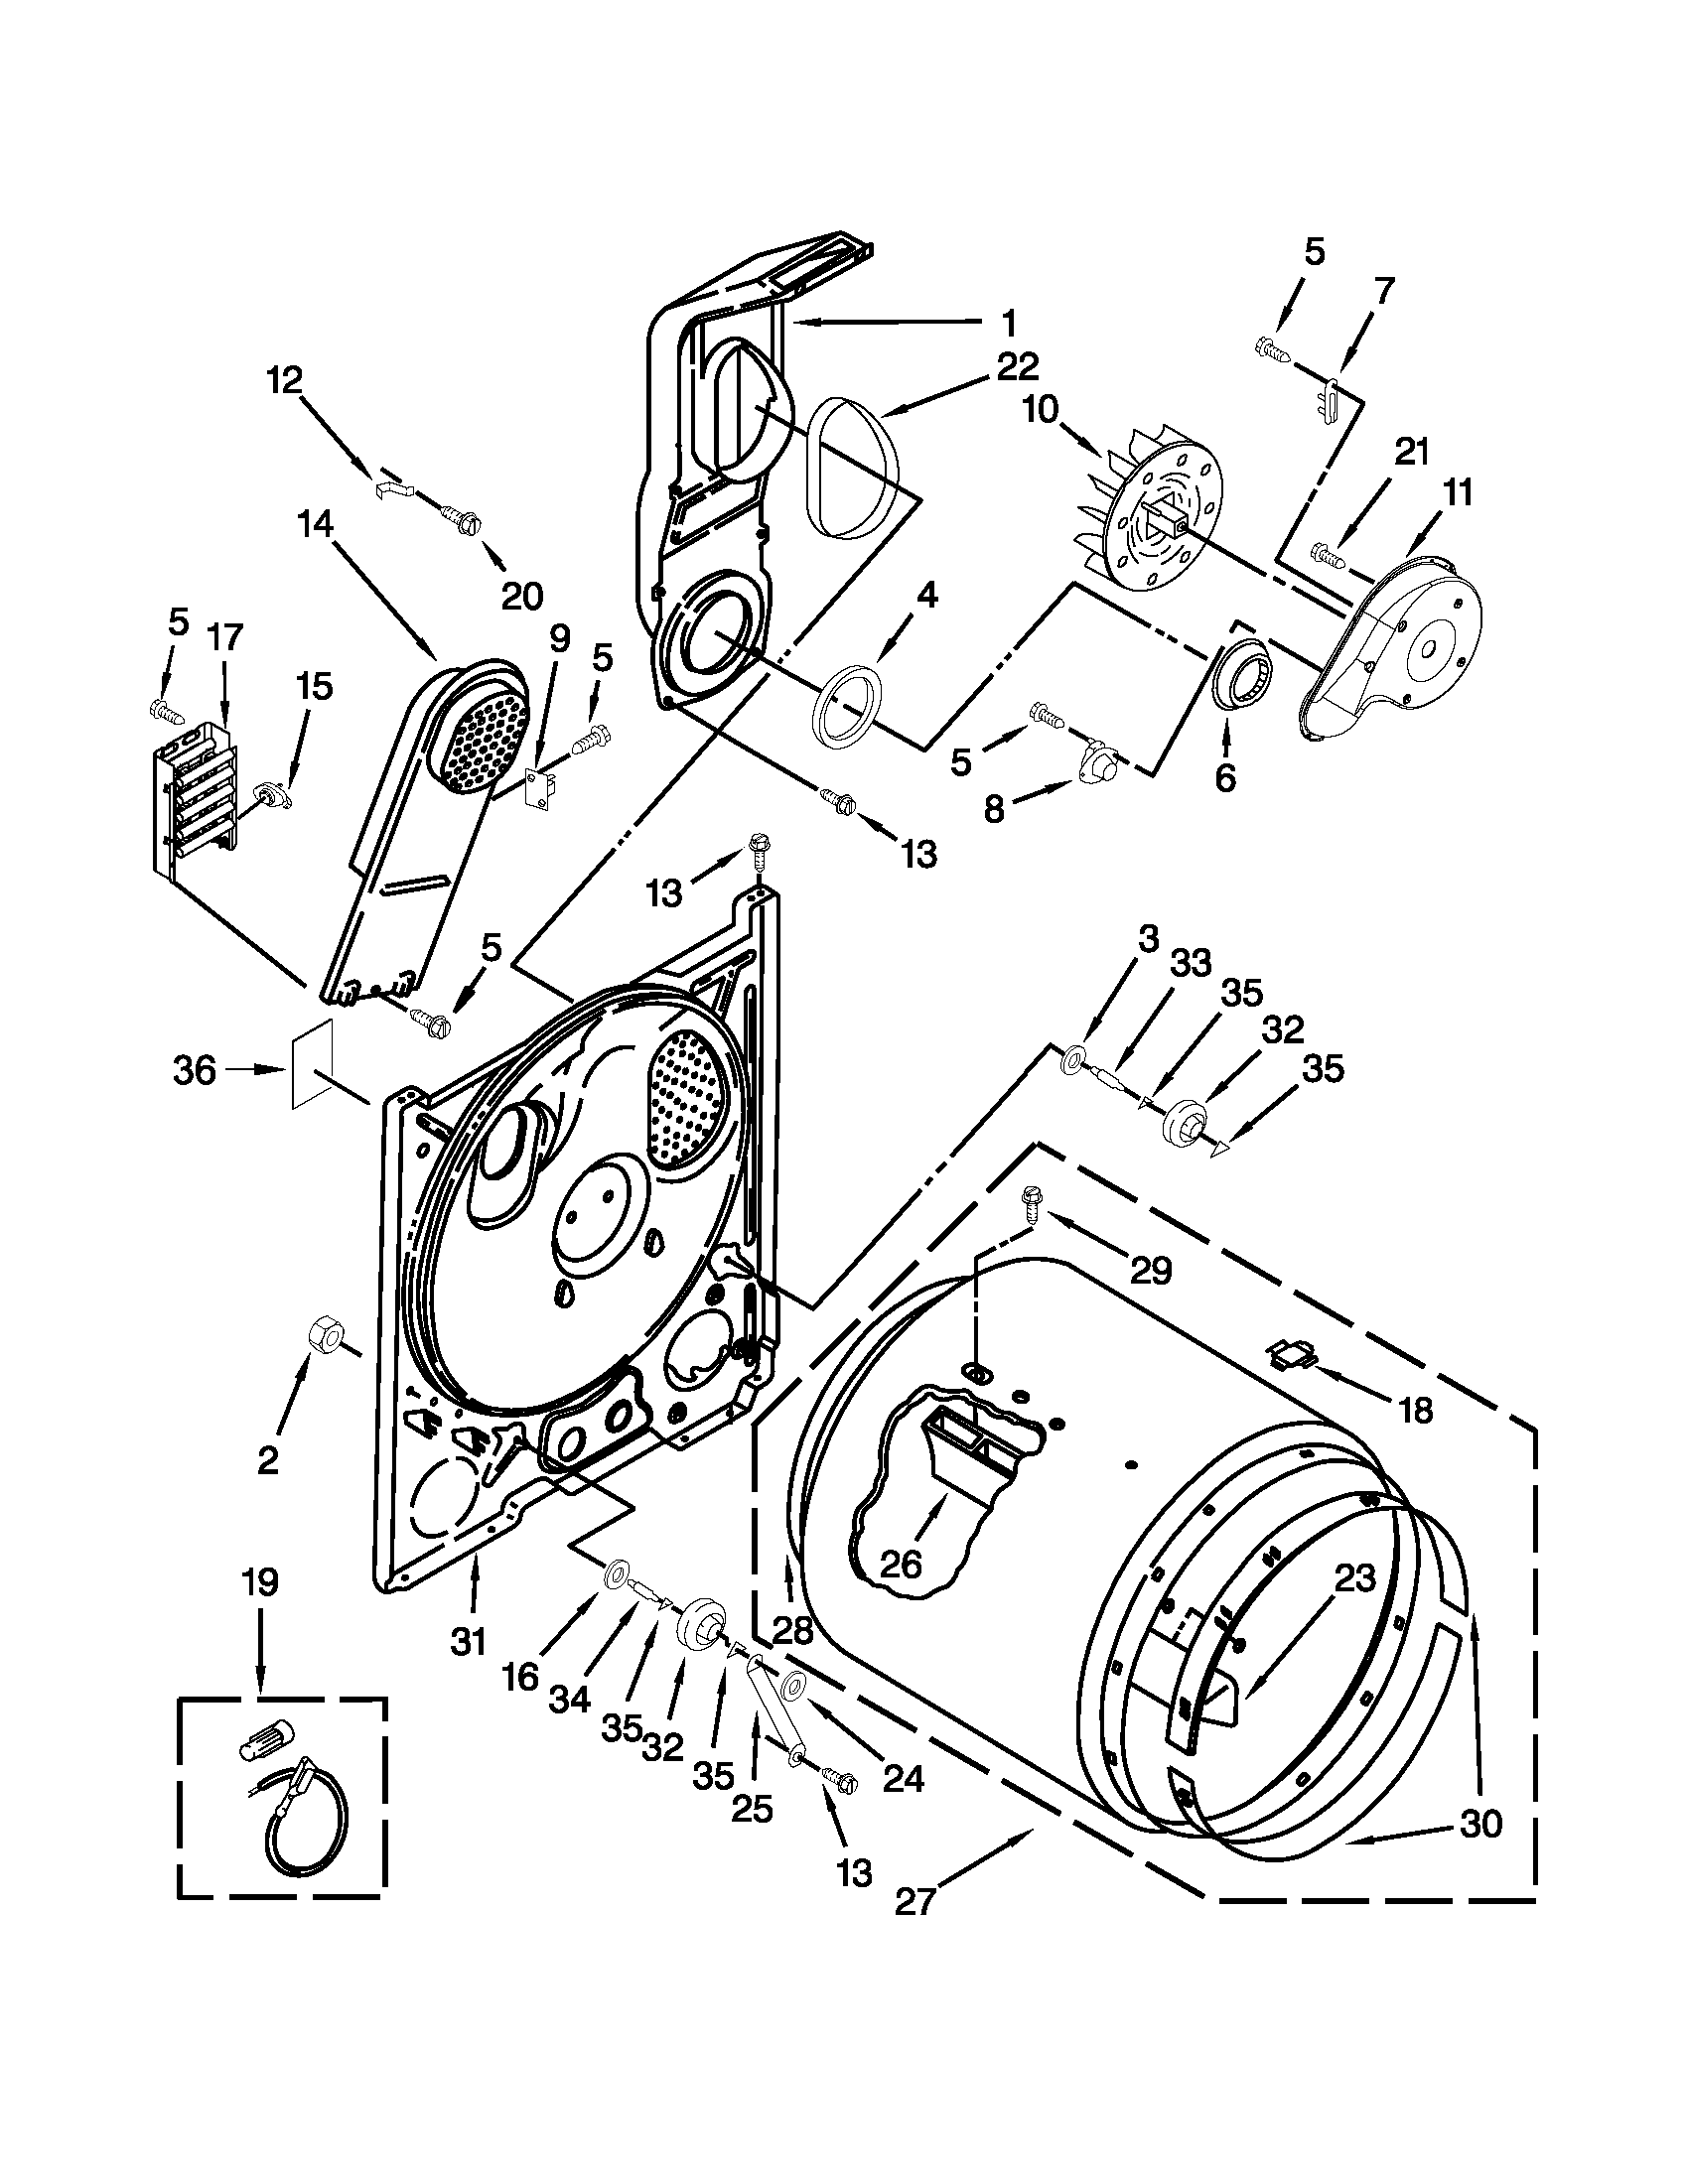 Admiral Dryer Wiring Diagram from c.searspartsdirect.com